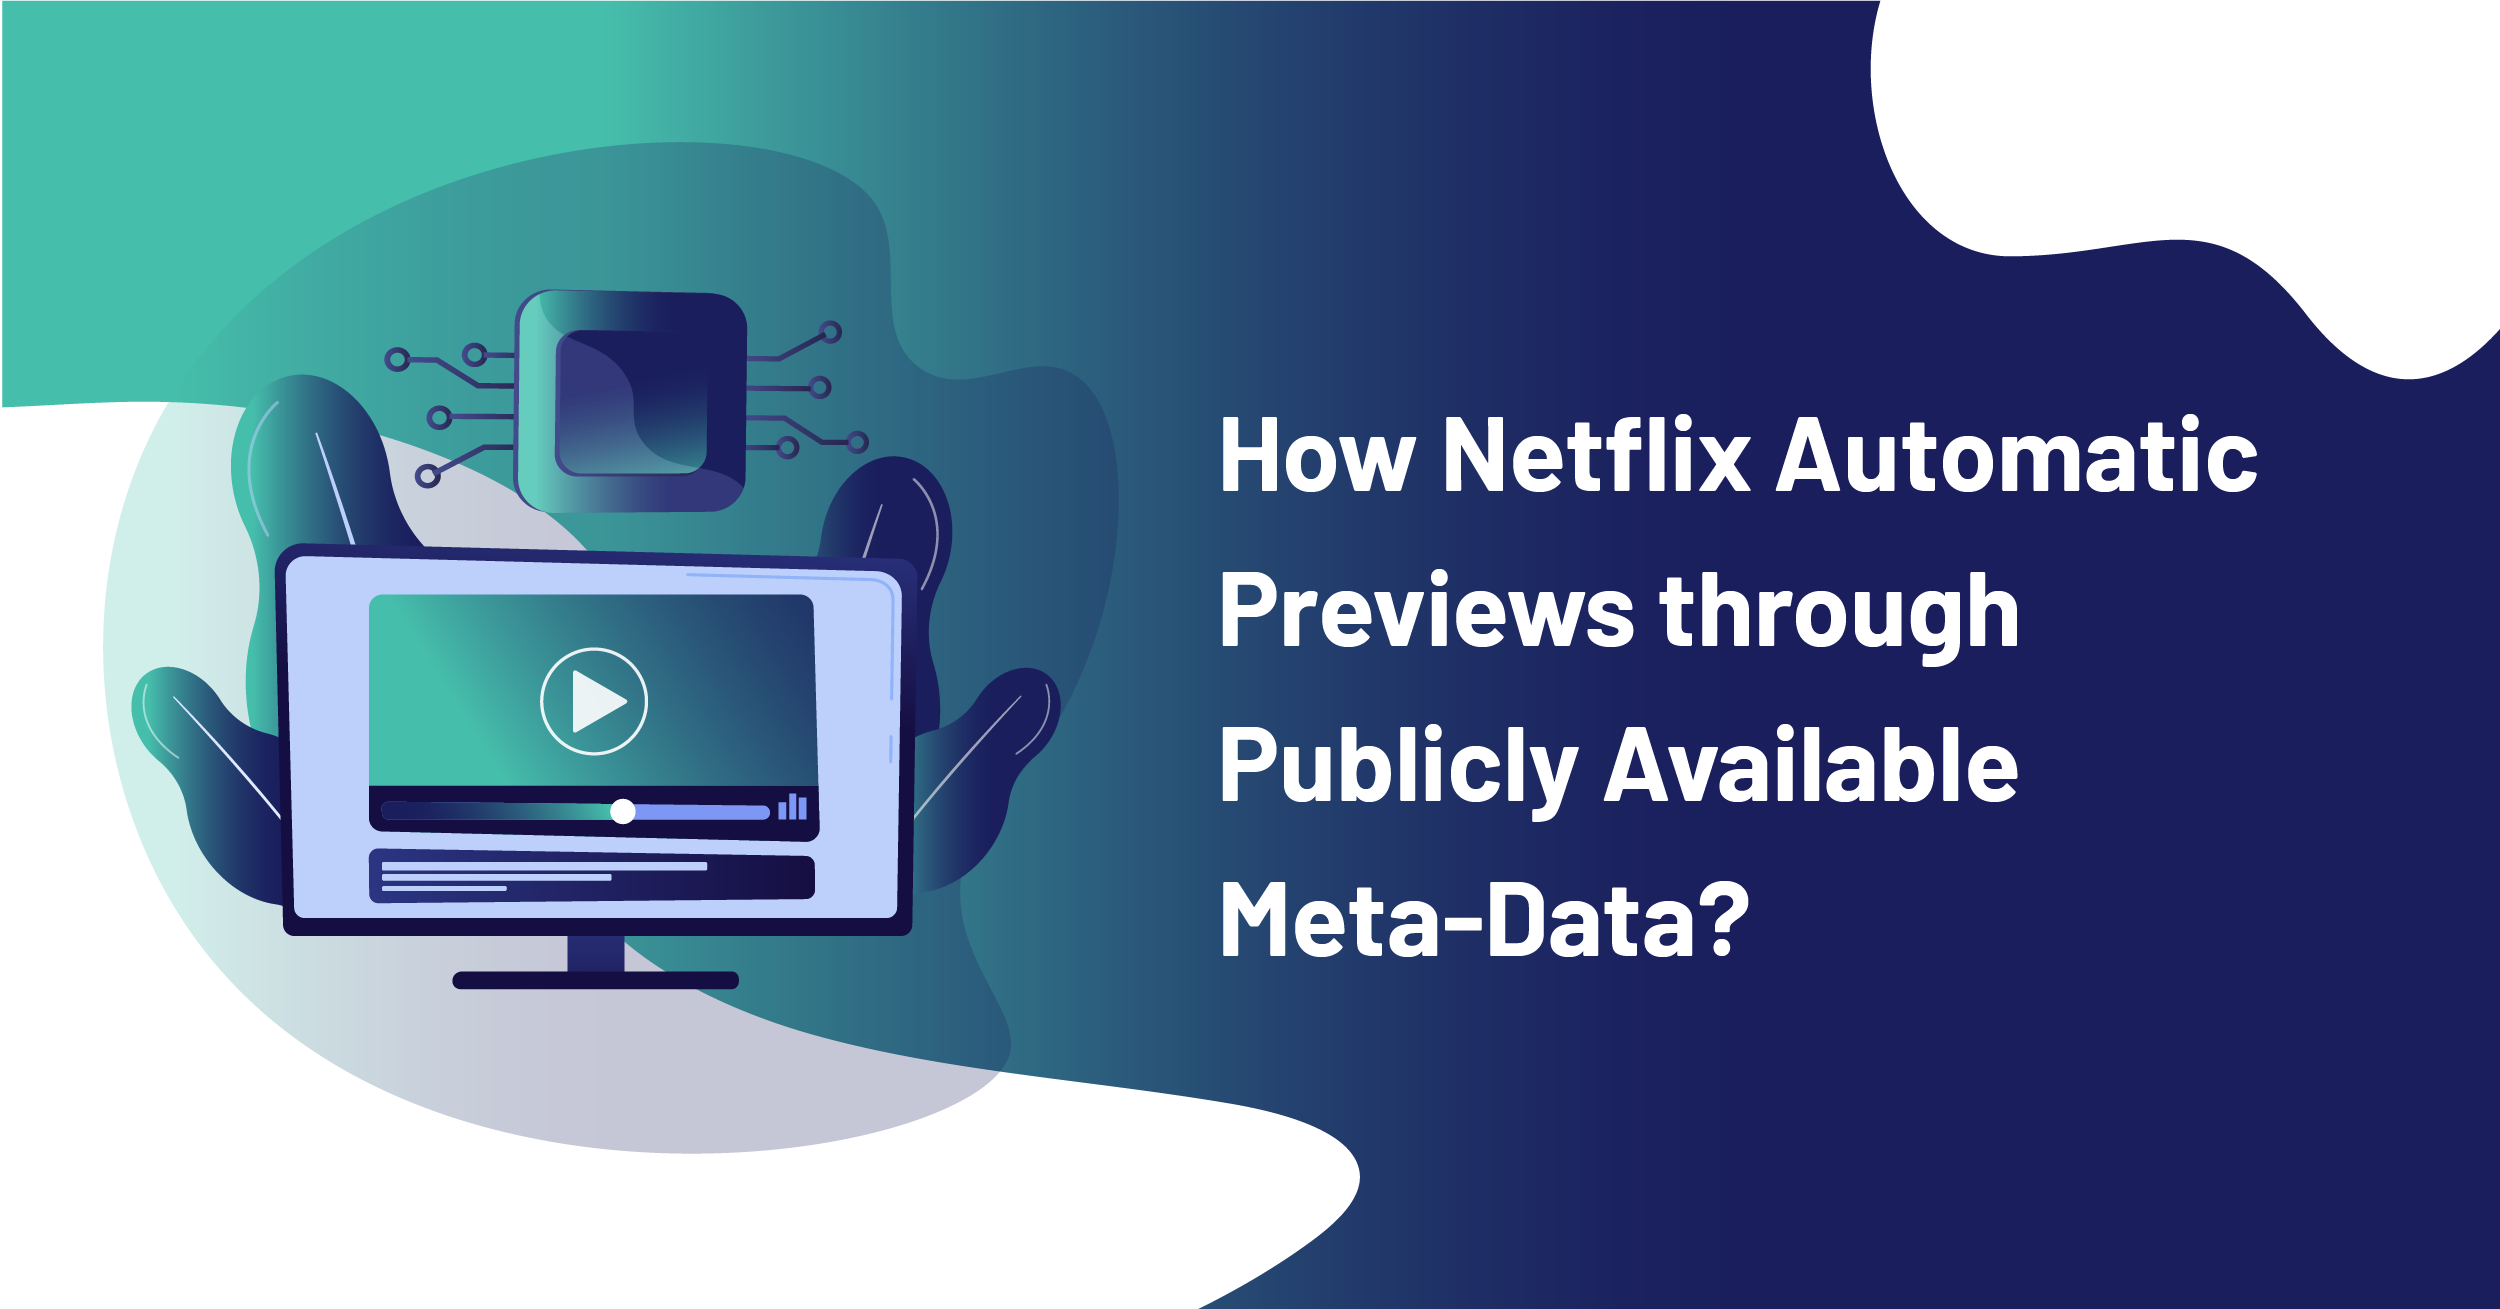 How Netflix Automatic Previews through Publicly Available Meta-Data